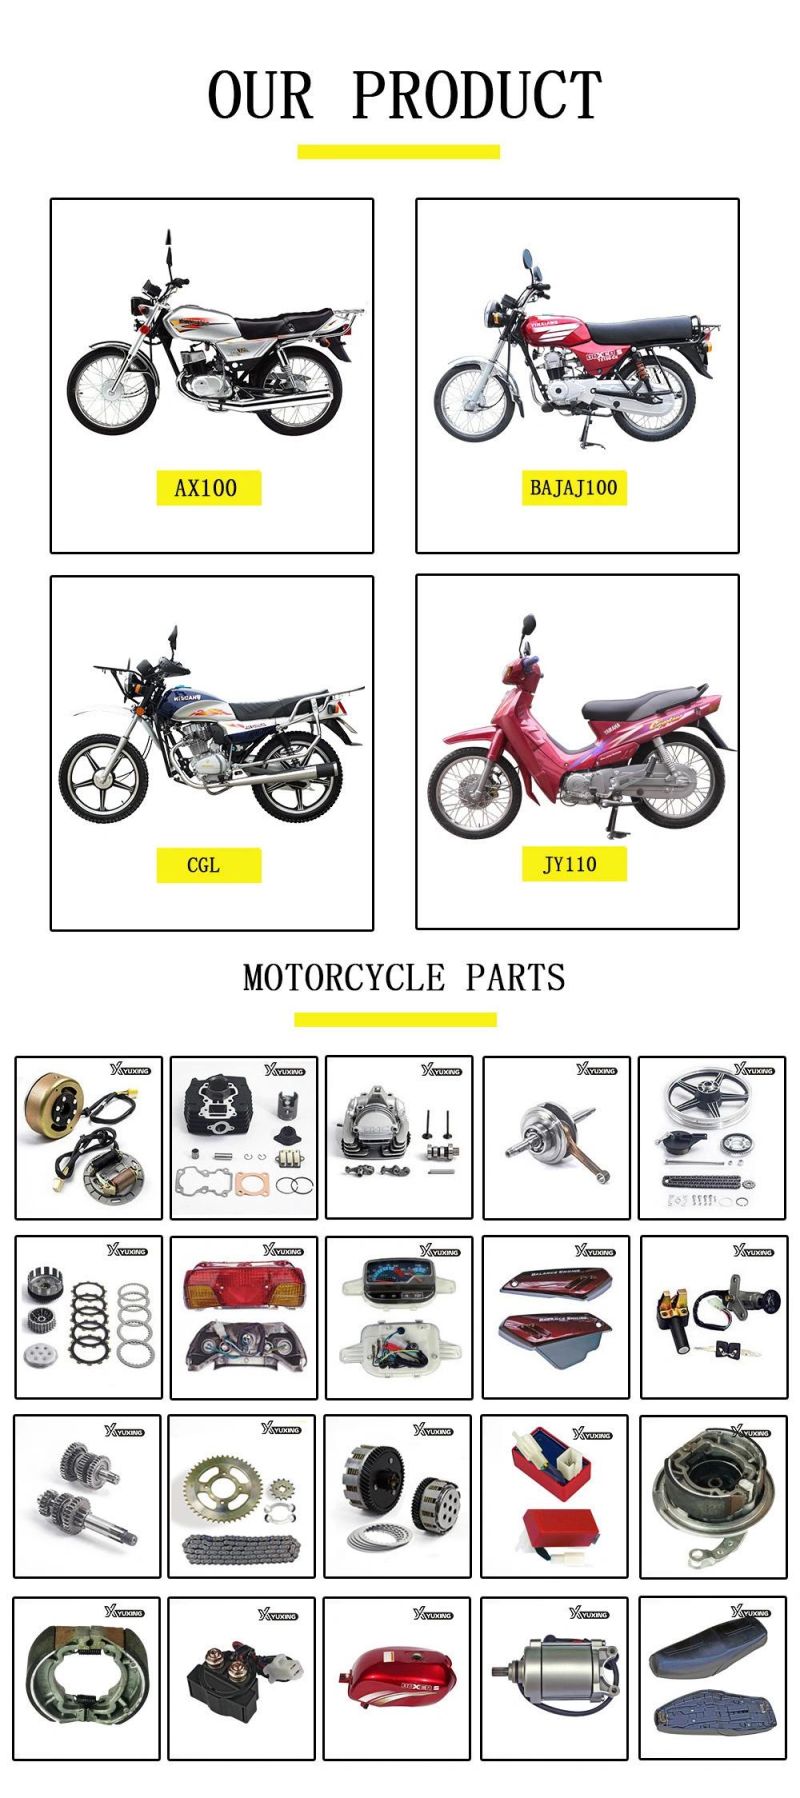 Yuxing Factory Motorcycle Spare Parts Maintenance-Free Ytx9-BS Motorcycle Battery for Motorbike